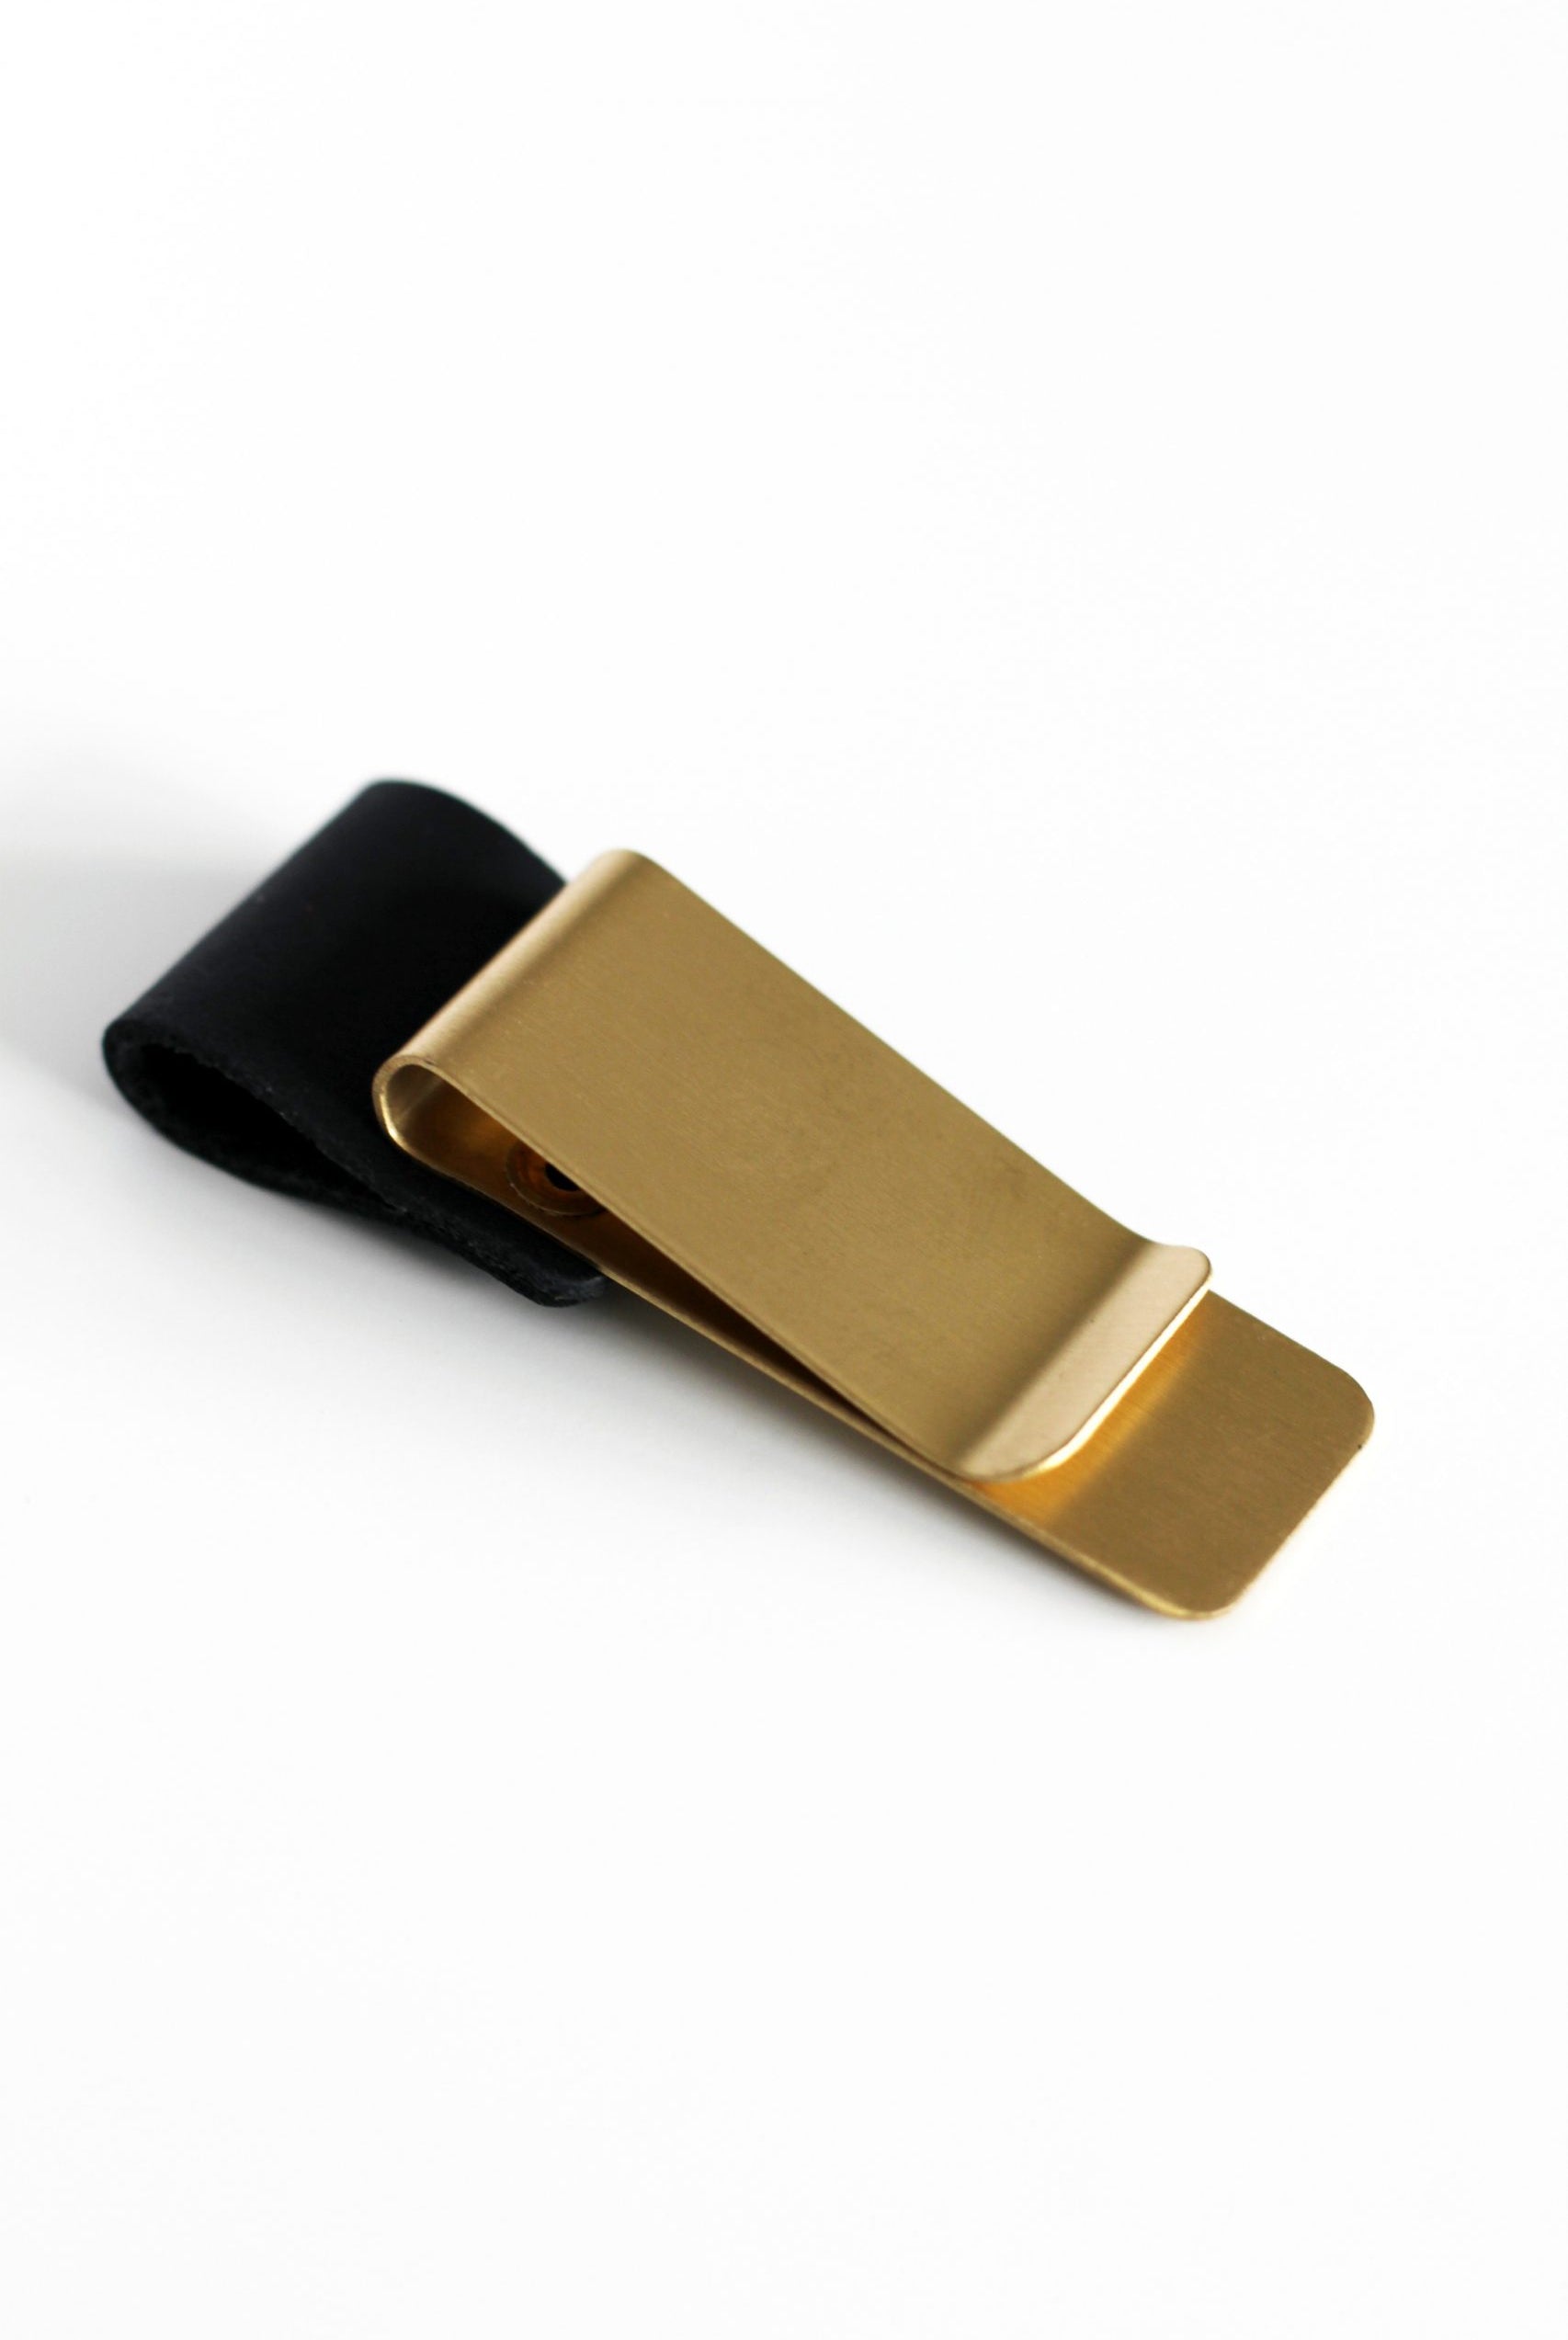 pen holder with brass clip